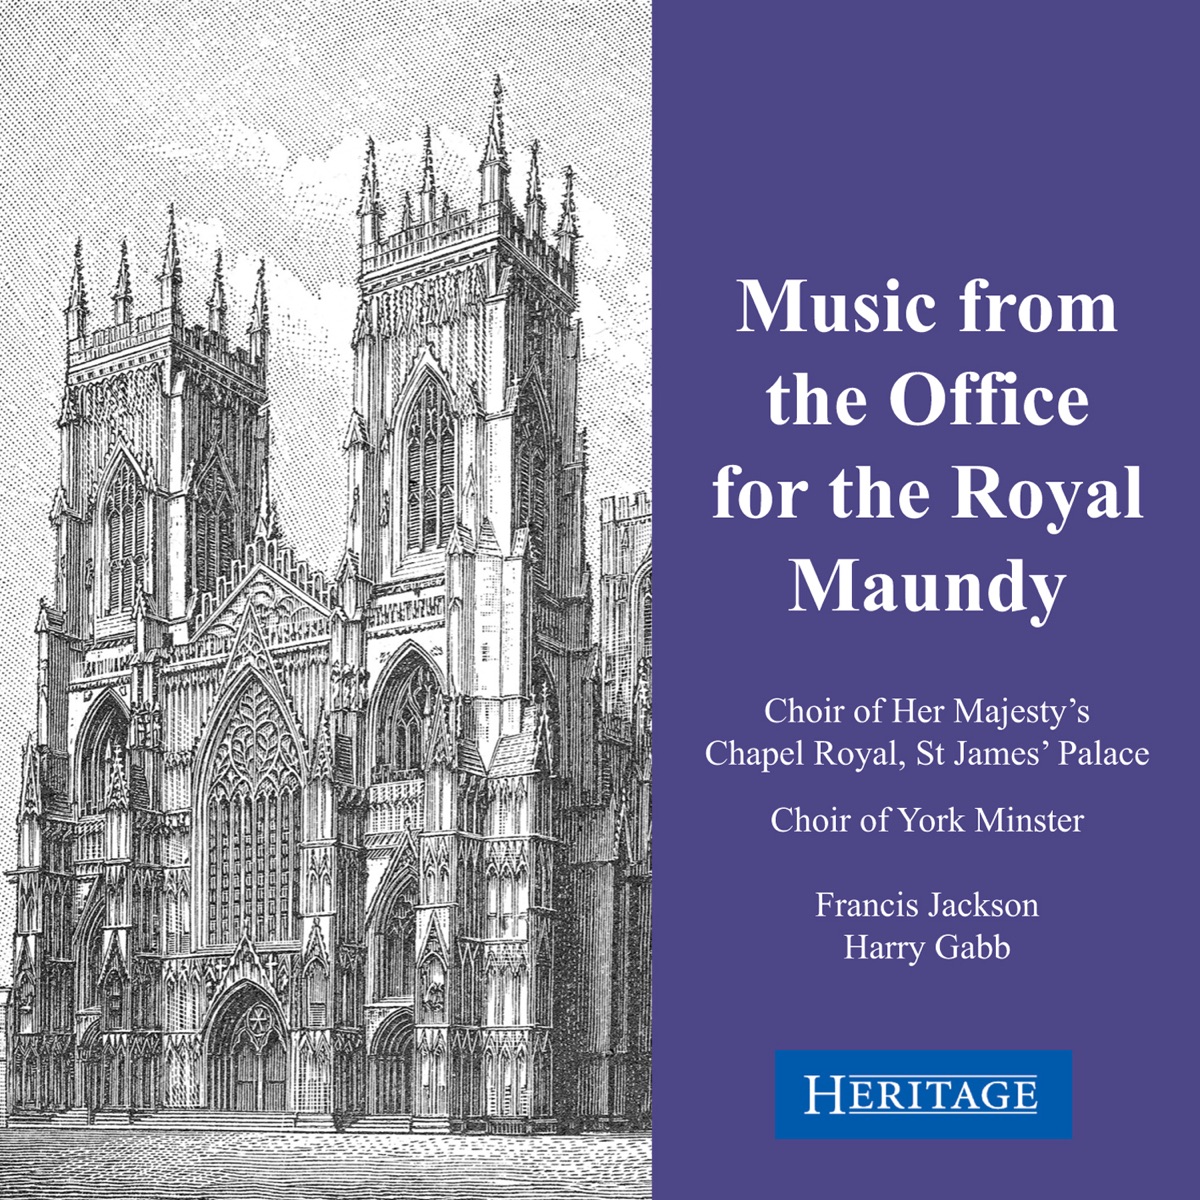 Music from the Office for the Royal Maundy by Francis Jackson